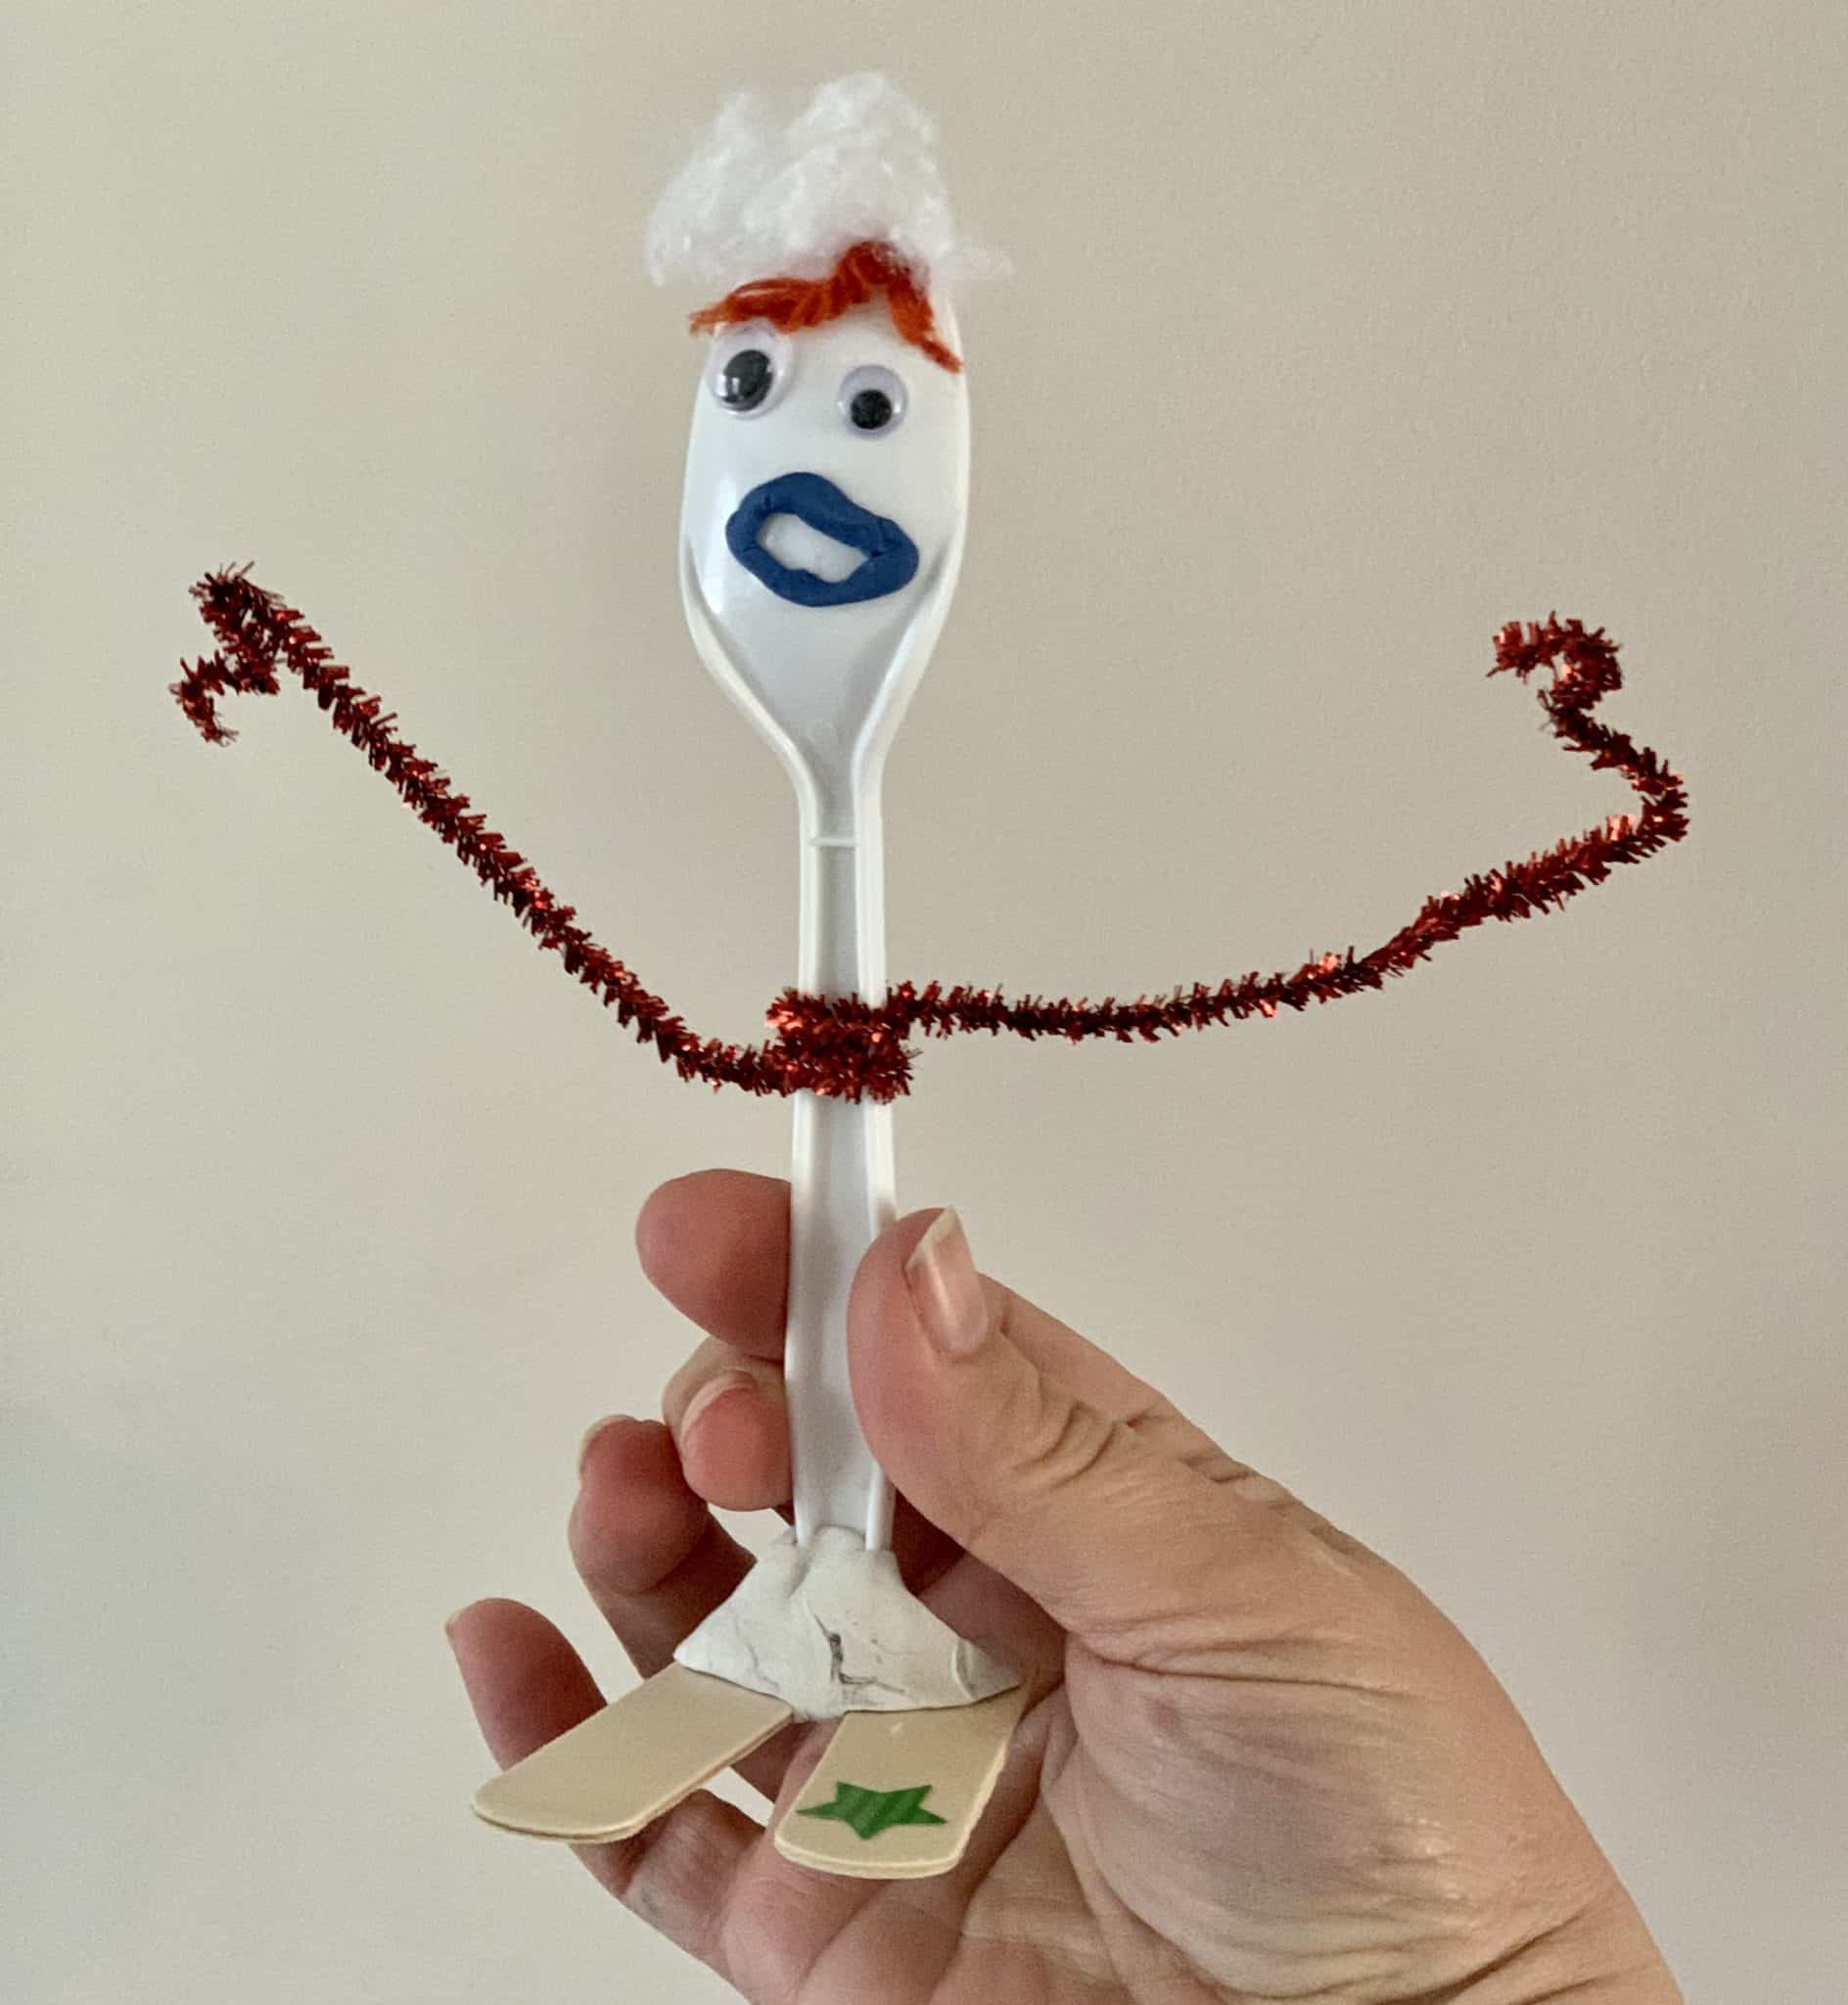 Forky made with a spoon